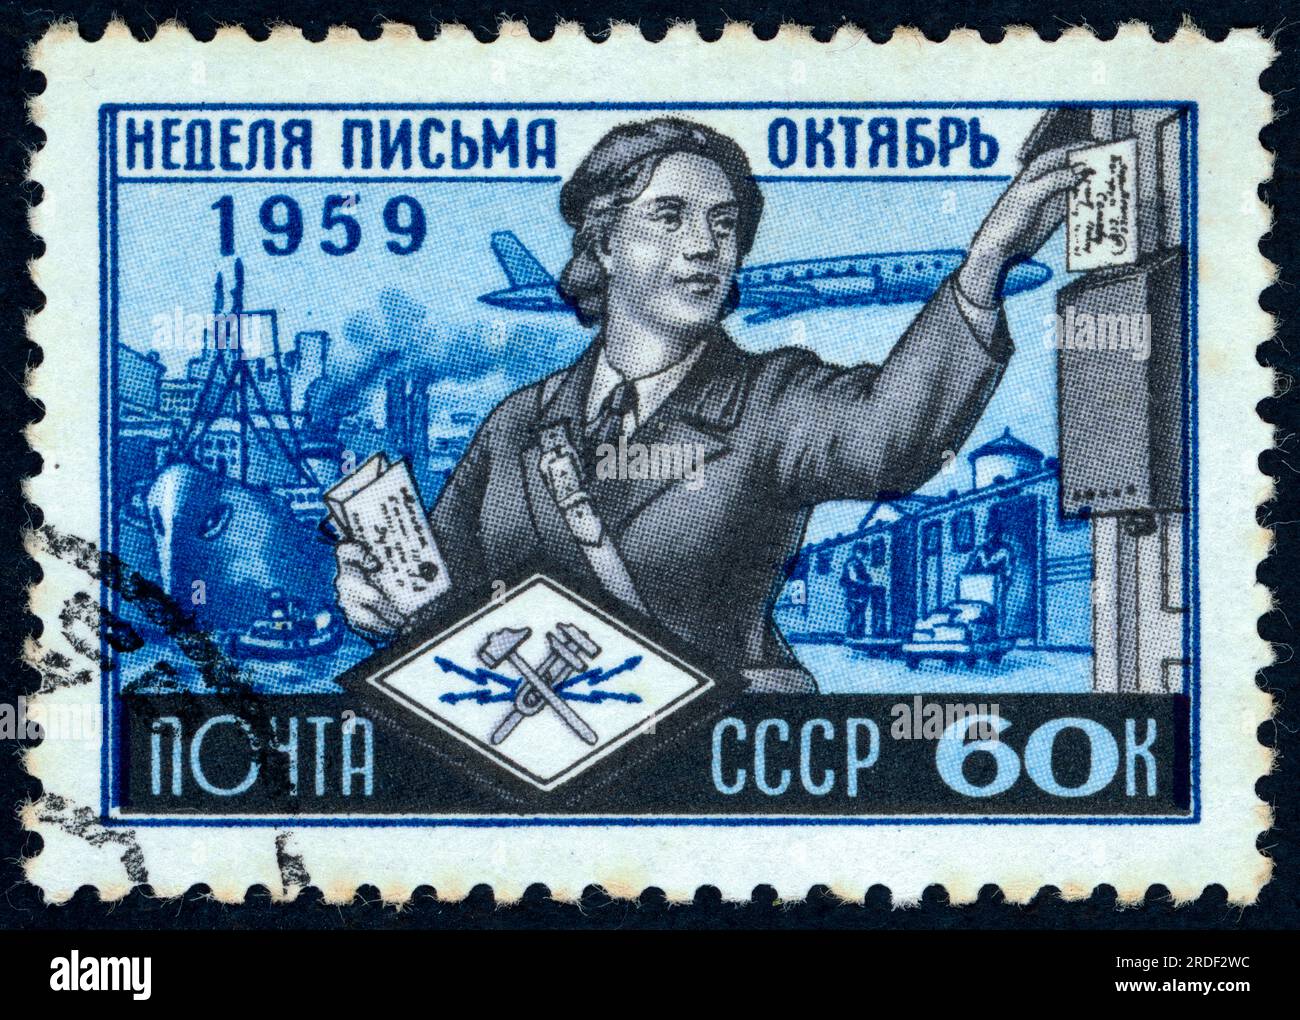 Postage stamp issued in the USSR in 1959 on the occasion of the World Post Day & International Letter Writing Week. Stock Photo